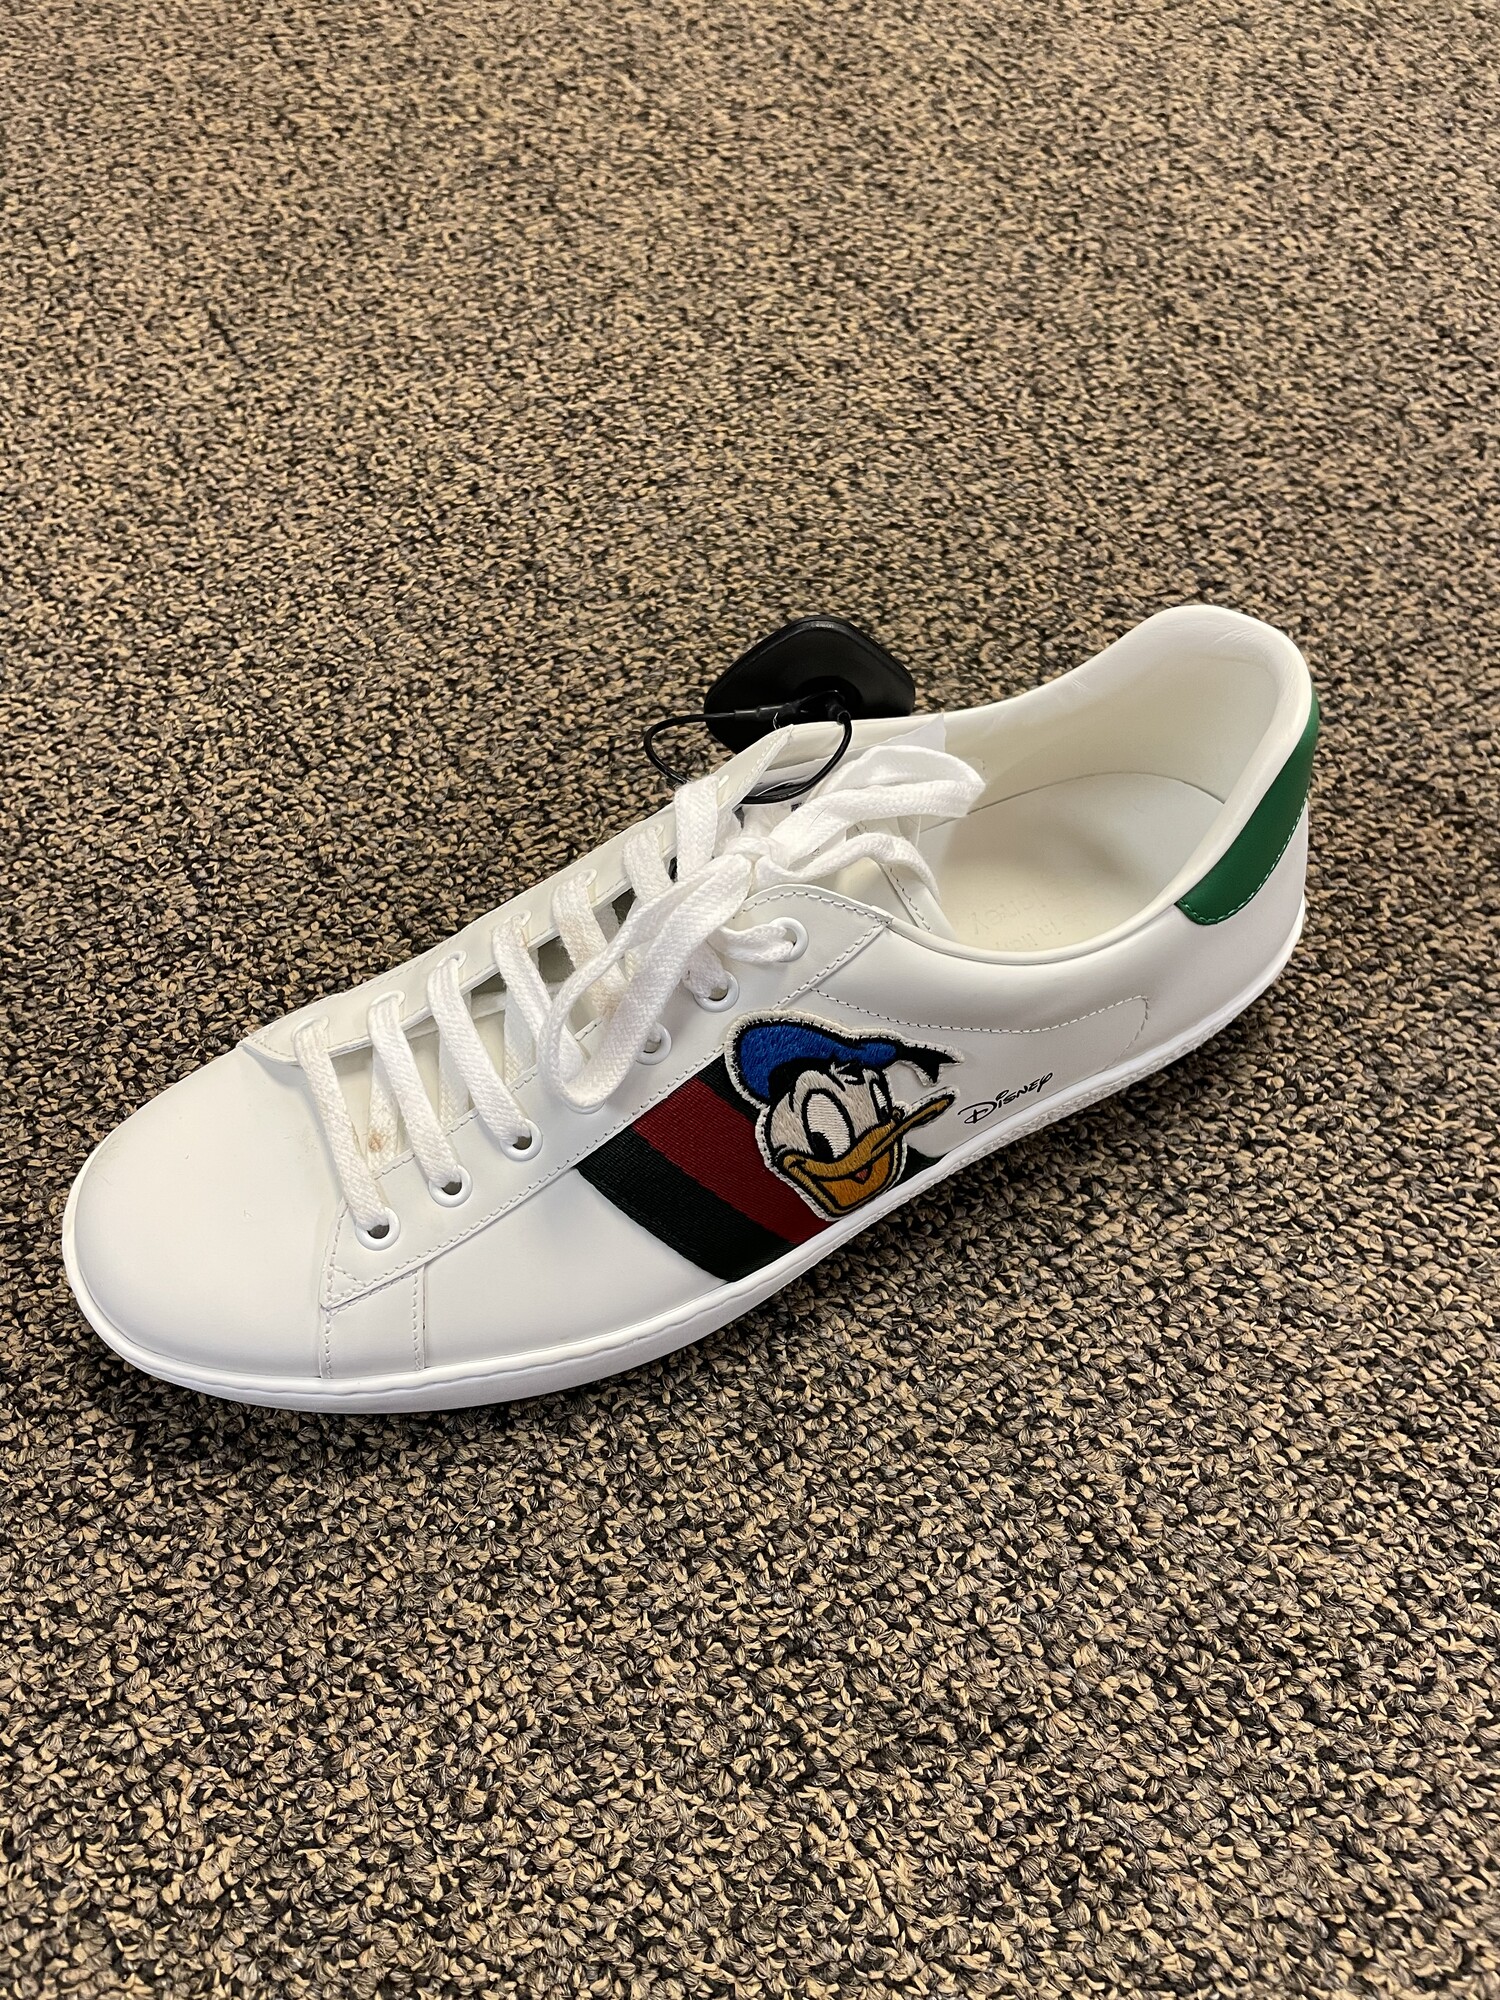 Gucci Mens Donald Duck Disney Sneakers, Wht Mlti, Size: 11.  Can be unisex.  Like new.